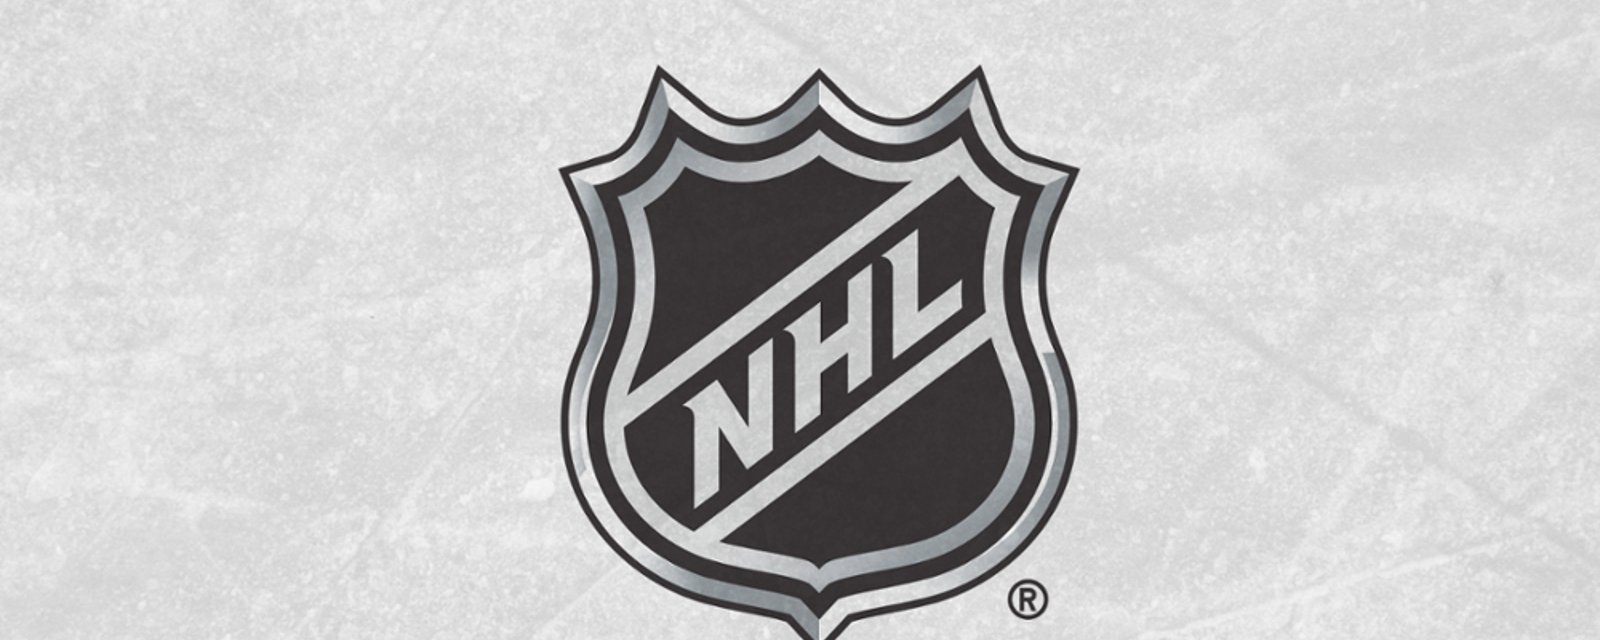 Coronavirus forces the cancellation of NHL games